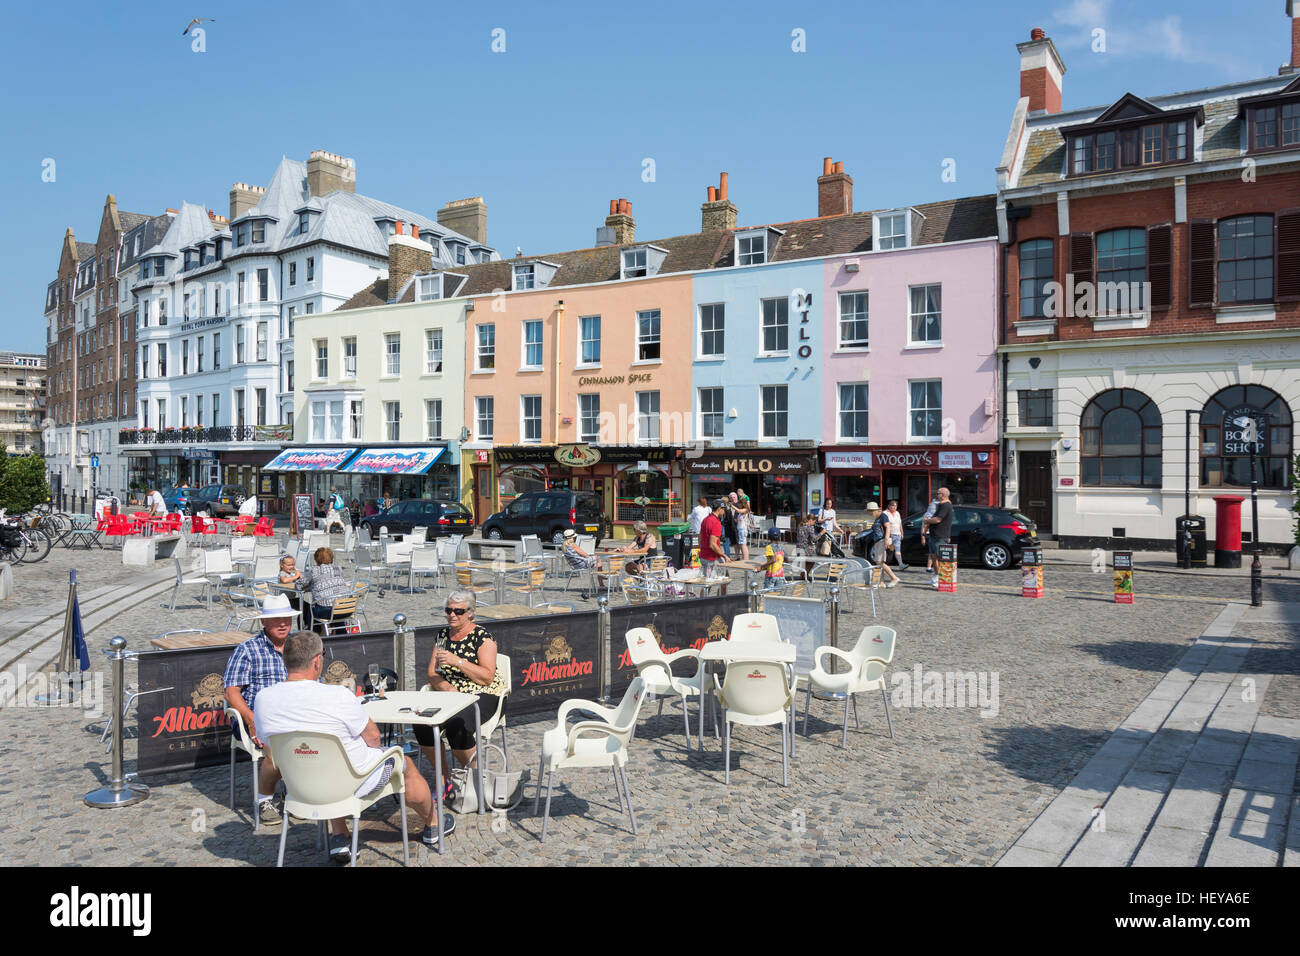 The Parade, Old Town, Margate, Kent, England, United Kingdom Stock Photo